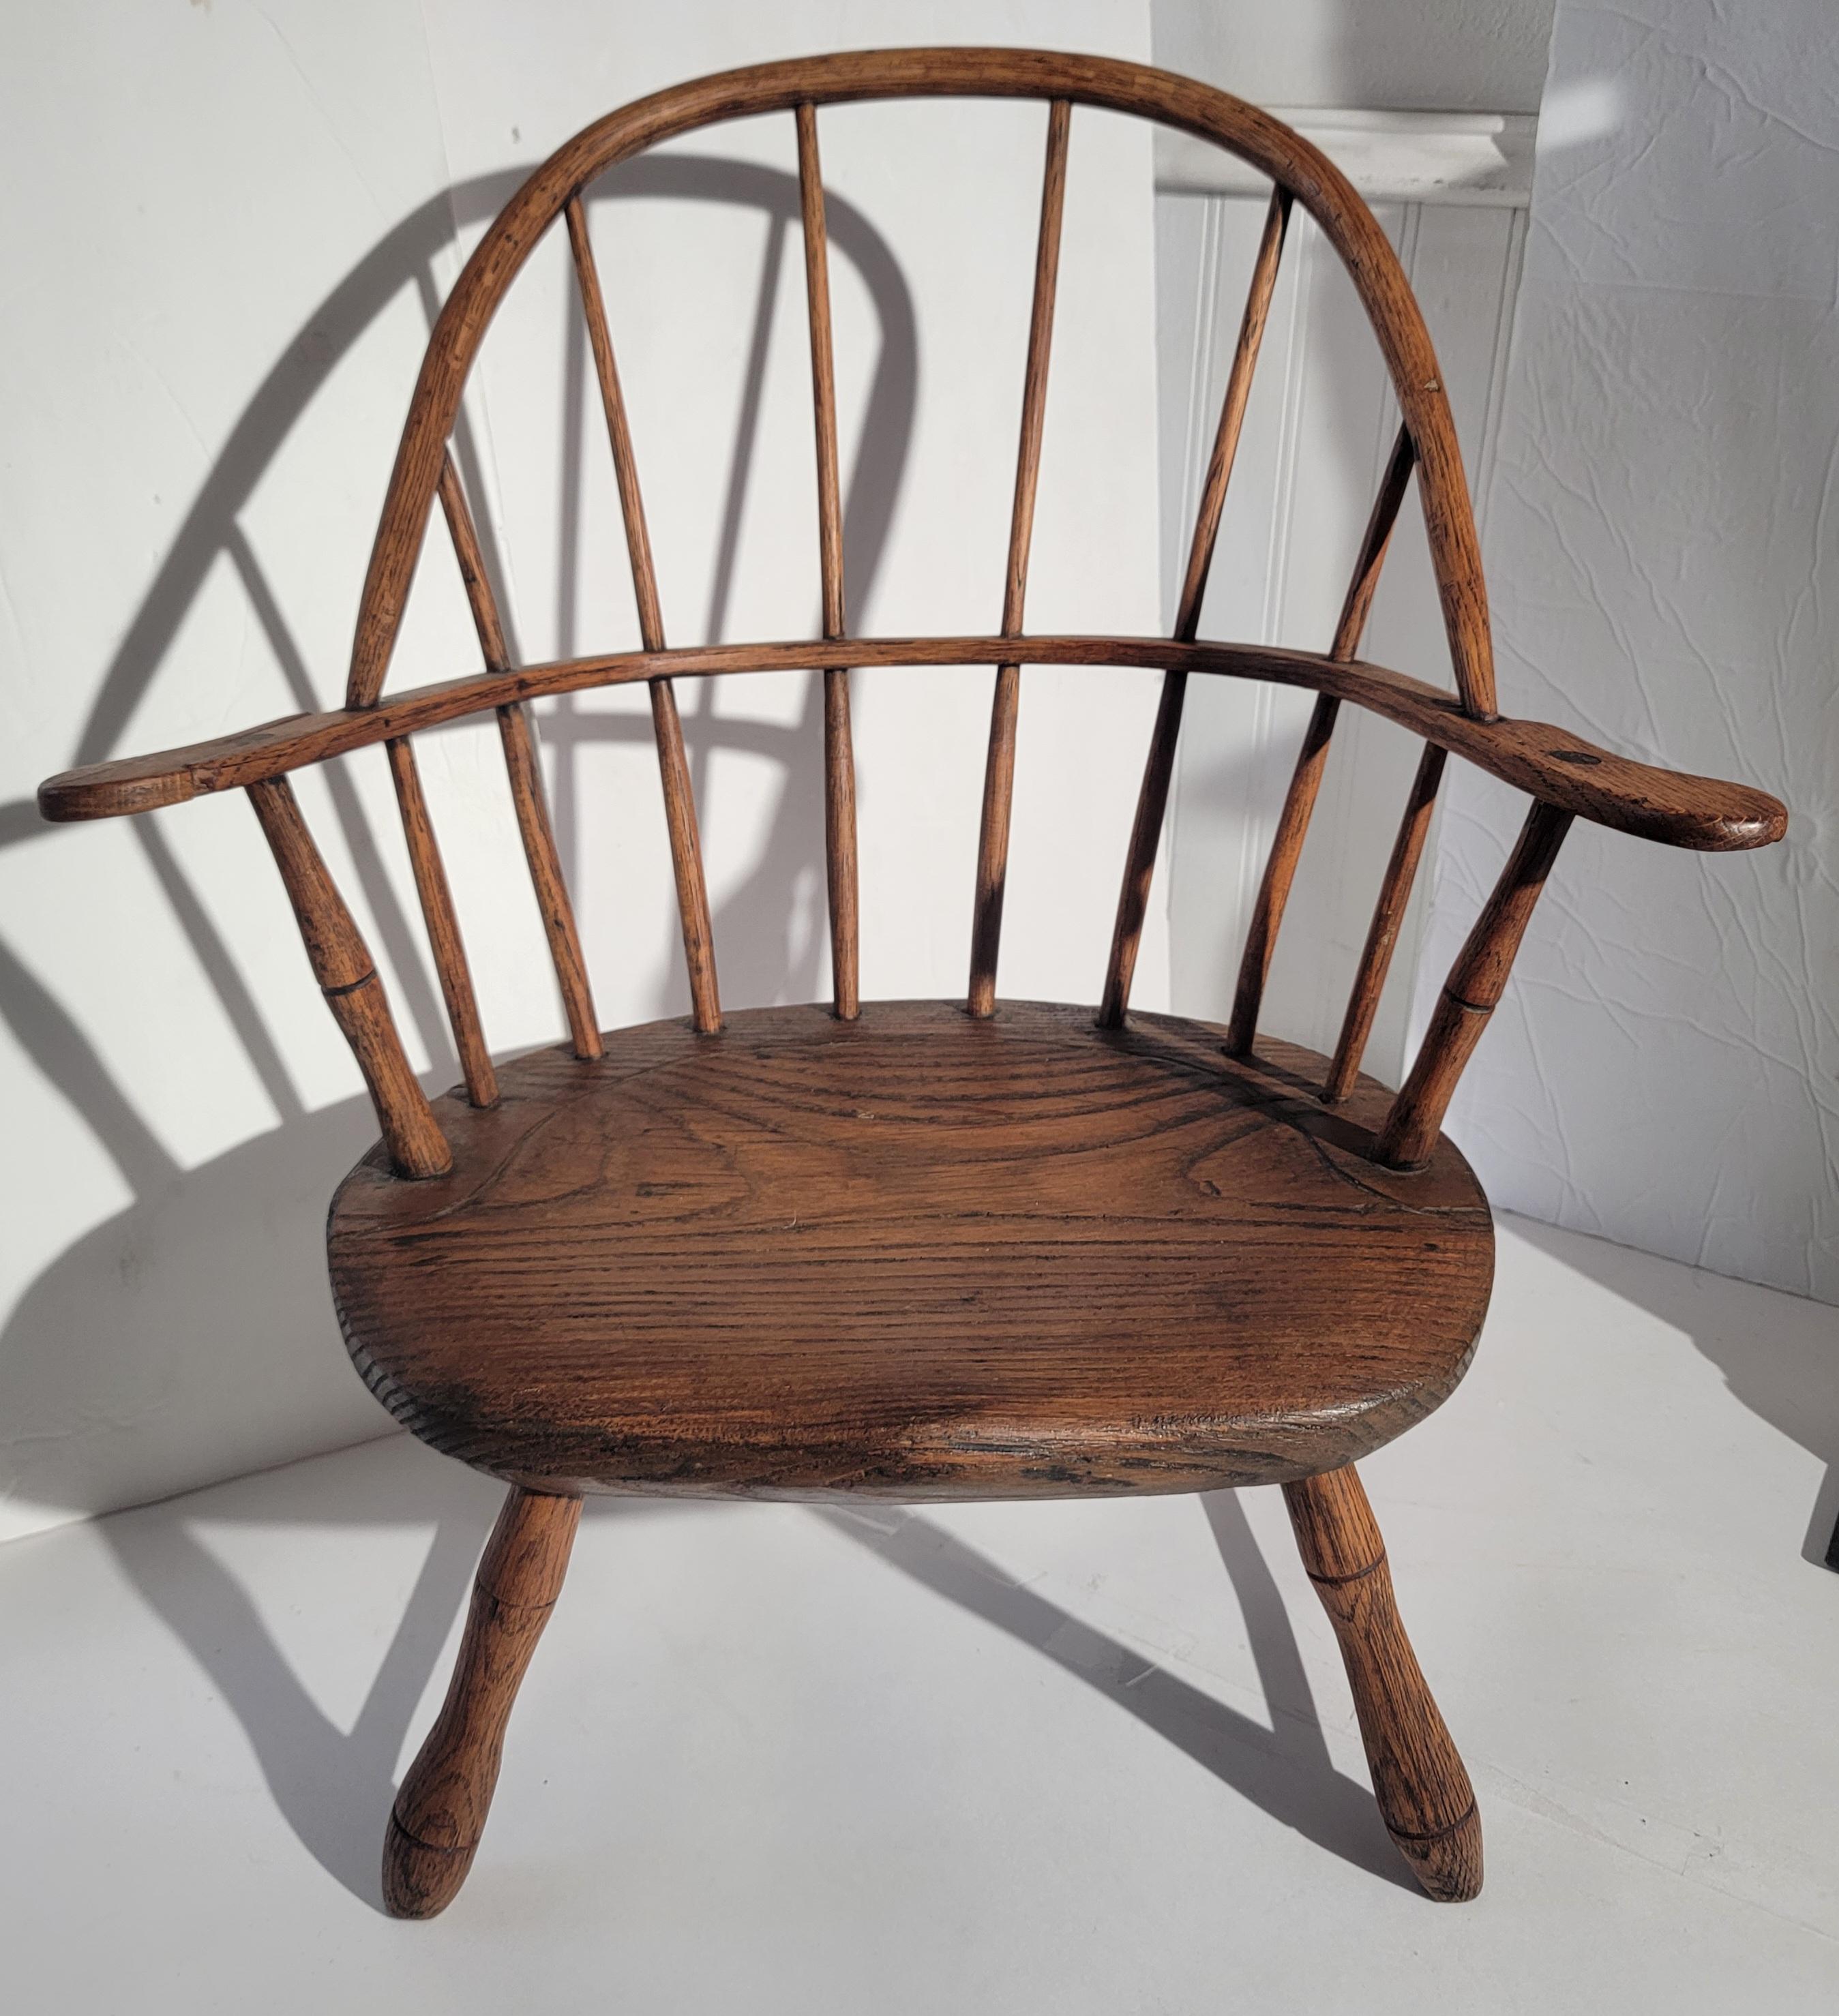 Early 19thc American hand crafted children's extended arm Windsor chair.This signed 